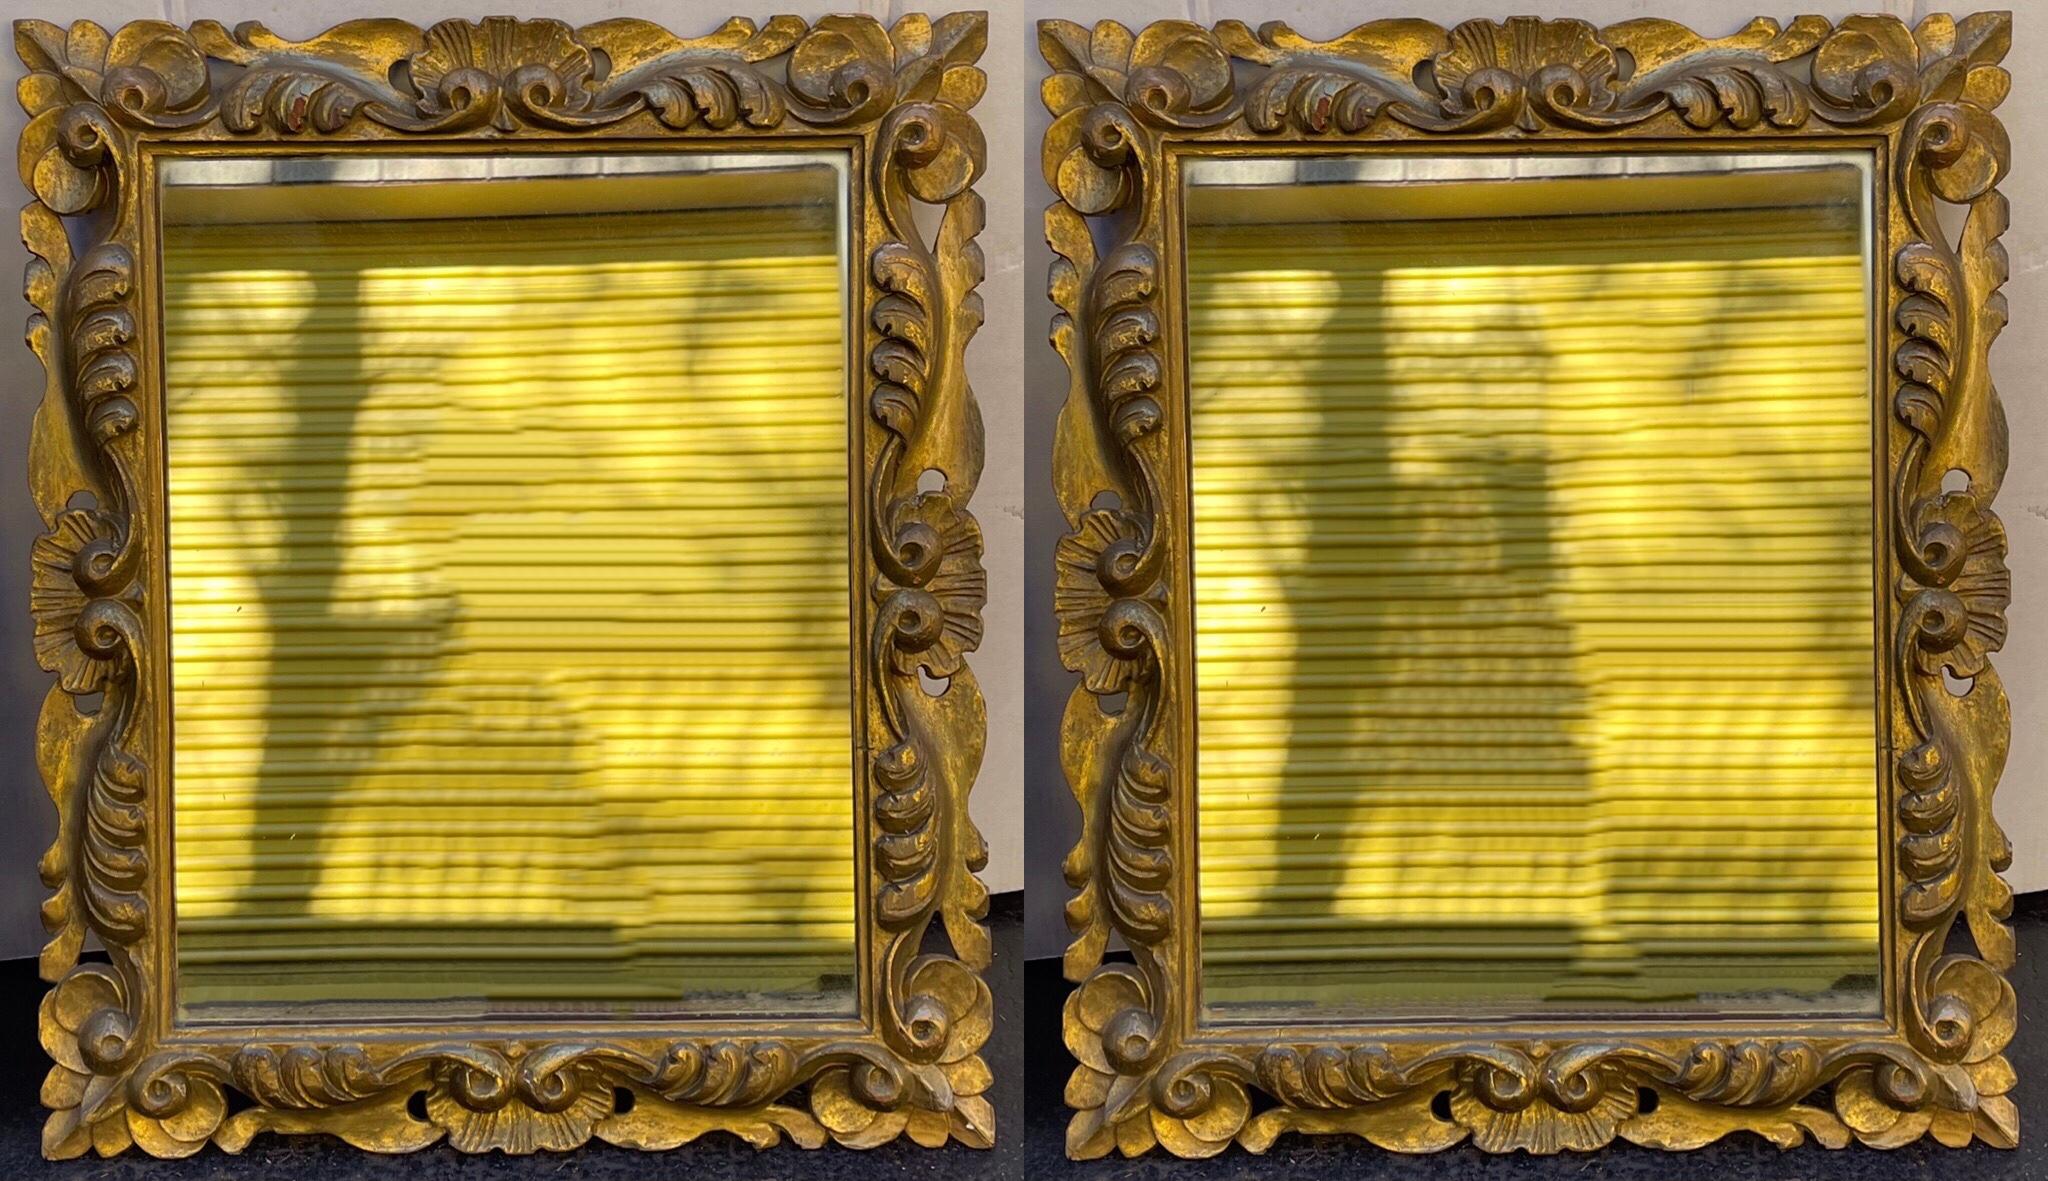 This is a lovely pair of 19th century French carved giltwood mirrors. They have a lovely carved shell motif. Note the hand hewn jointery at the corners!